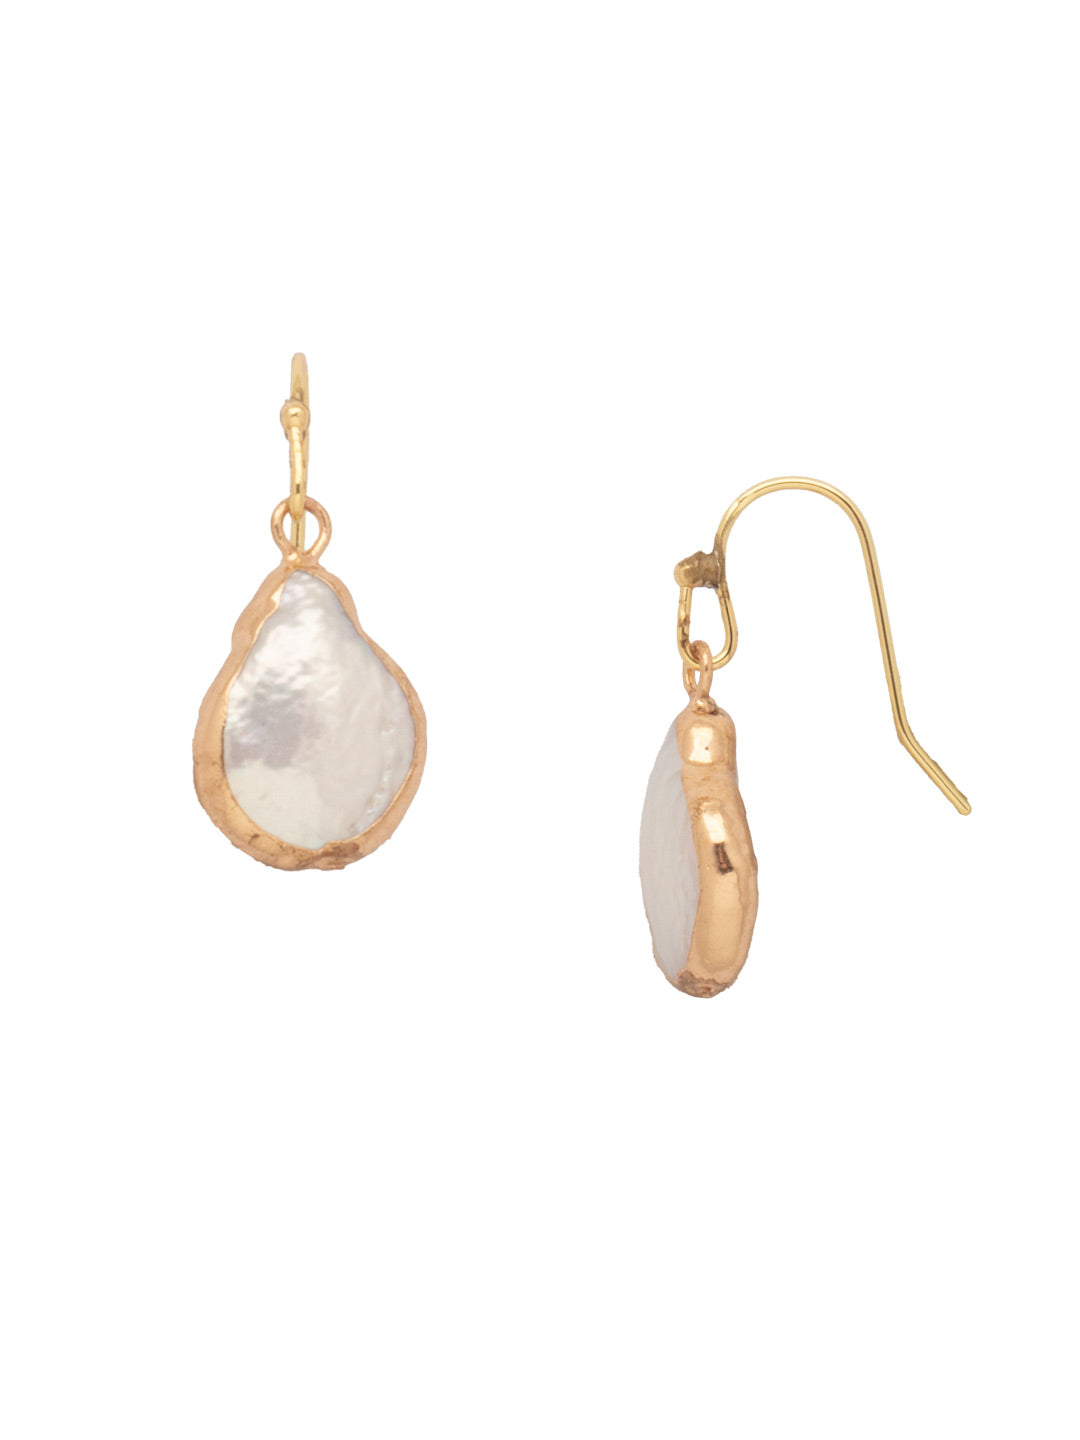 Penny Pearl Dangle Earrings - EFM15BGMDP - <p>The Penny Pearl Dangle Earrings feature a freshwater pearl on a classic french wire. From Sorrelli's Modern Pearl collection in our Bright Gold-tone finish.</p>